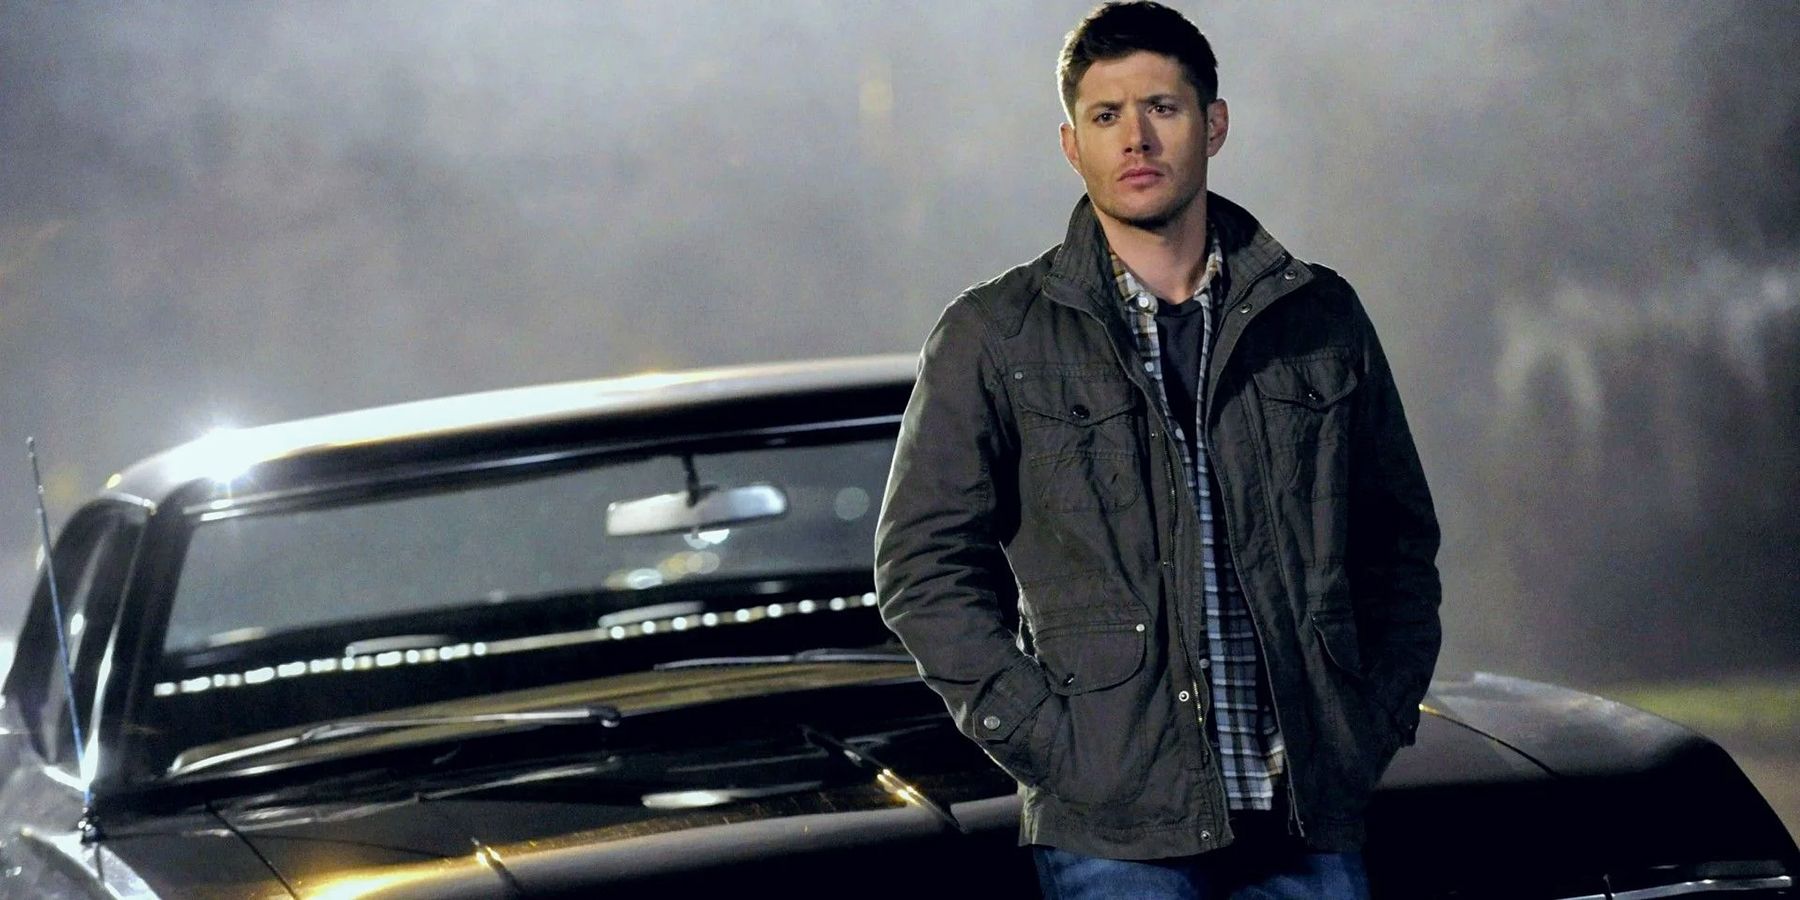 Jensen Ackles as Dean Winchester with the Impala in Supernatural